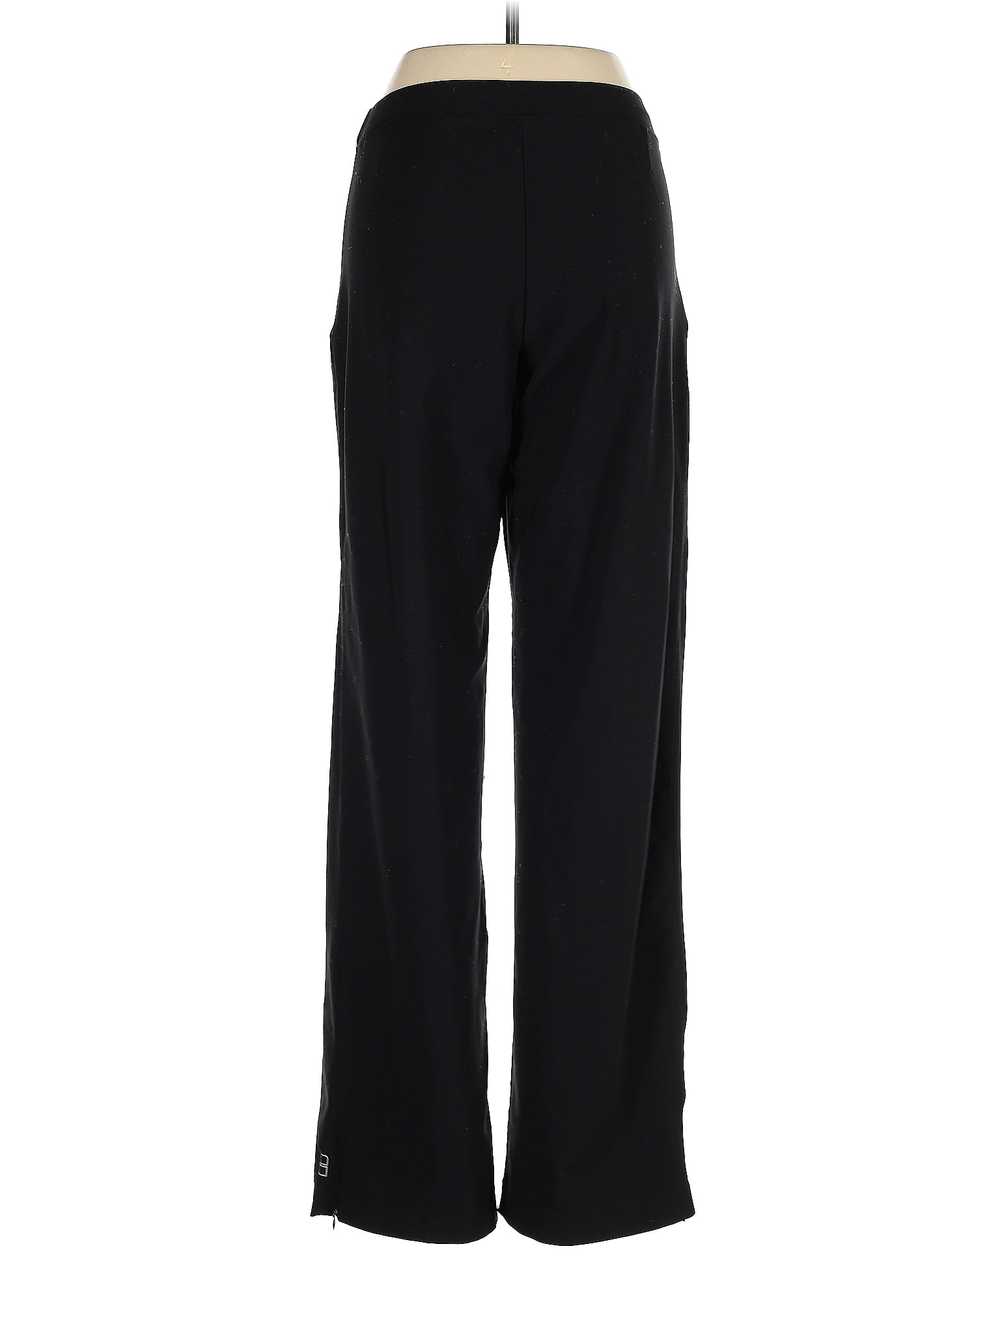 Lucy Women Black Casual Pants S Tall - image 2